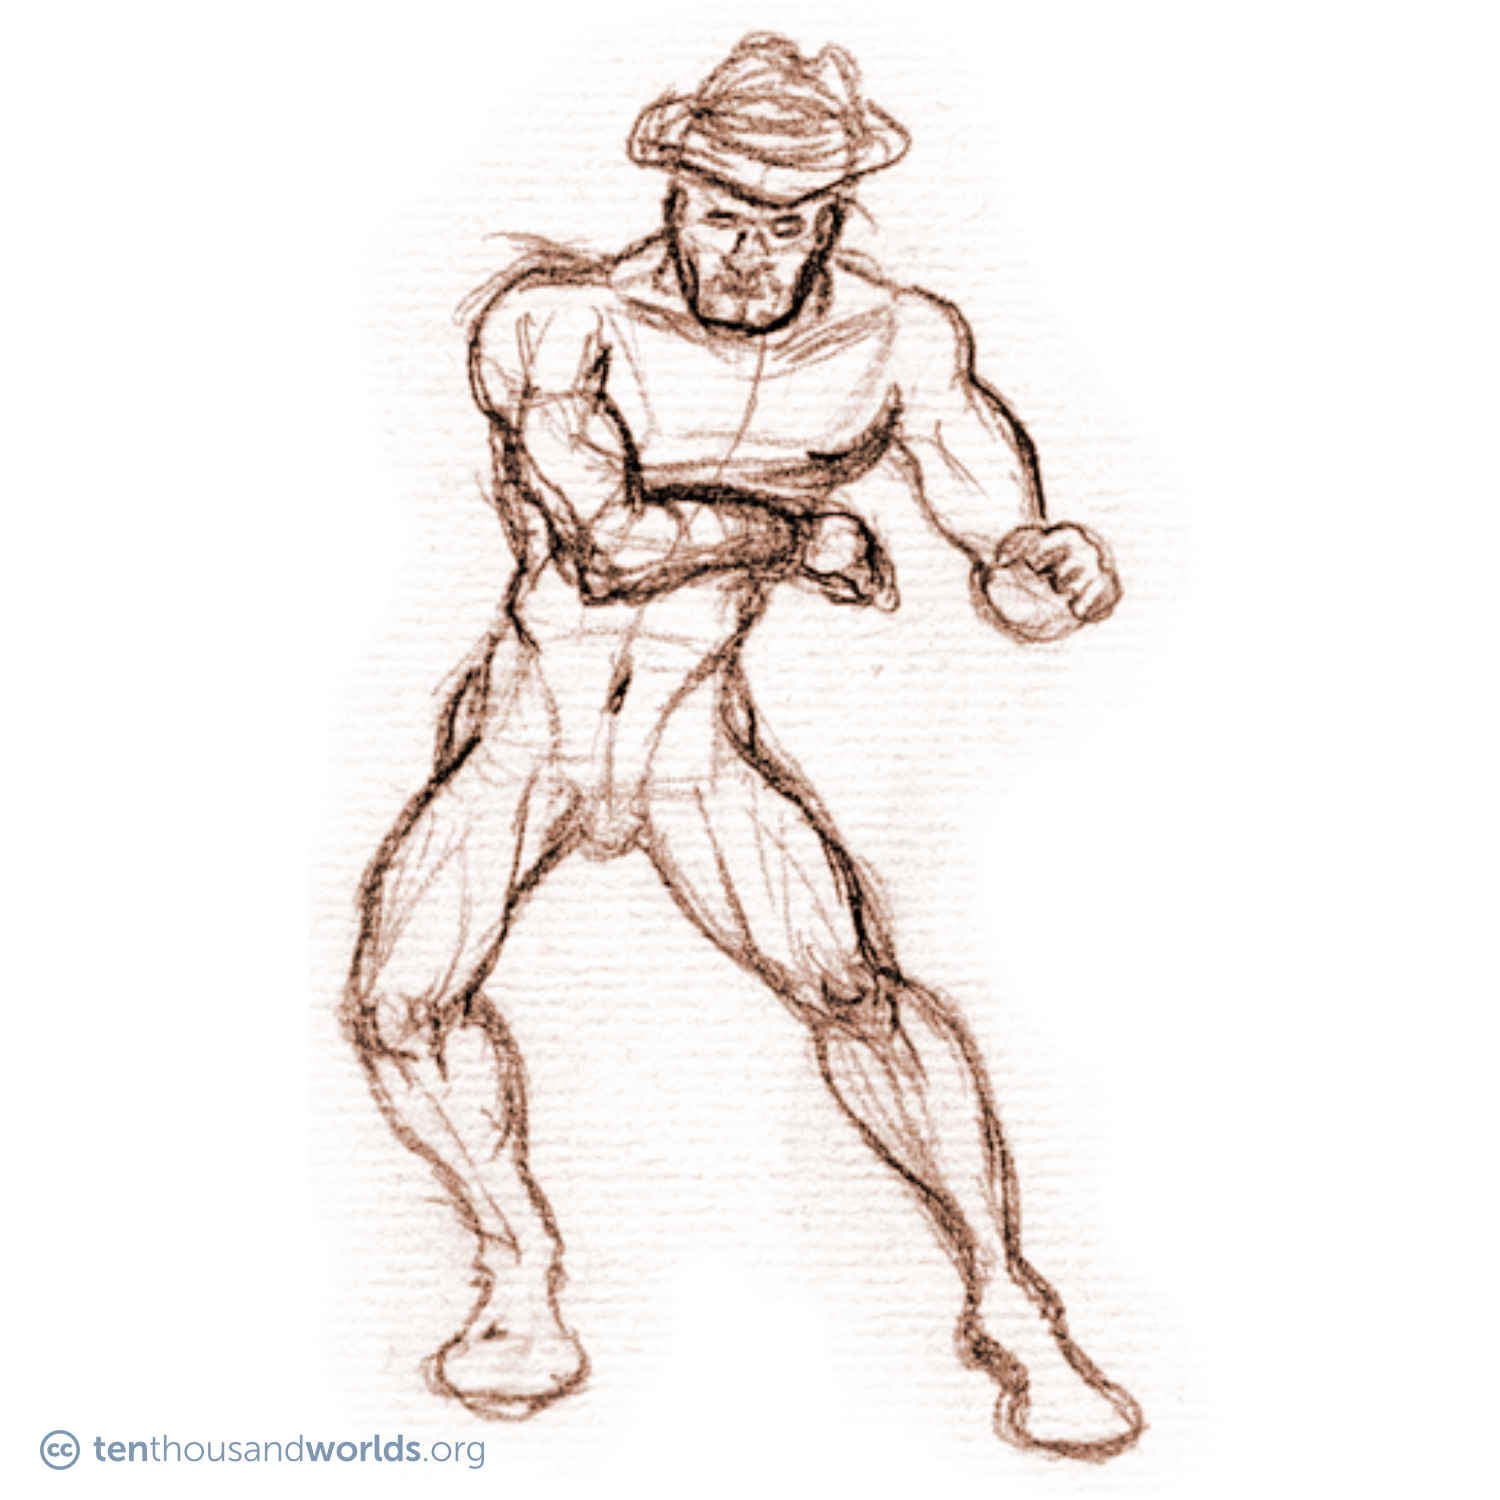 A rough pencil sketch of a man wearing a fedora, going through the motions of opening a coat and reaching for something within.